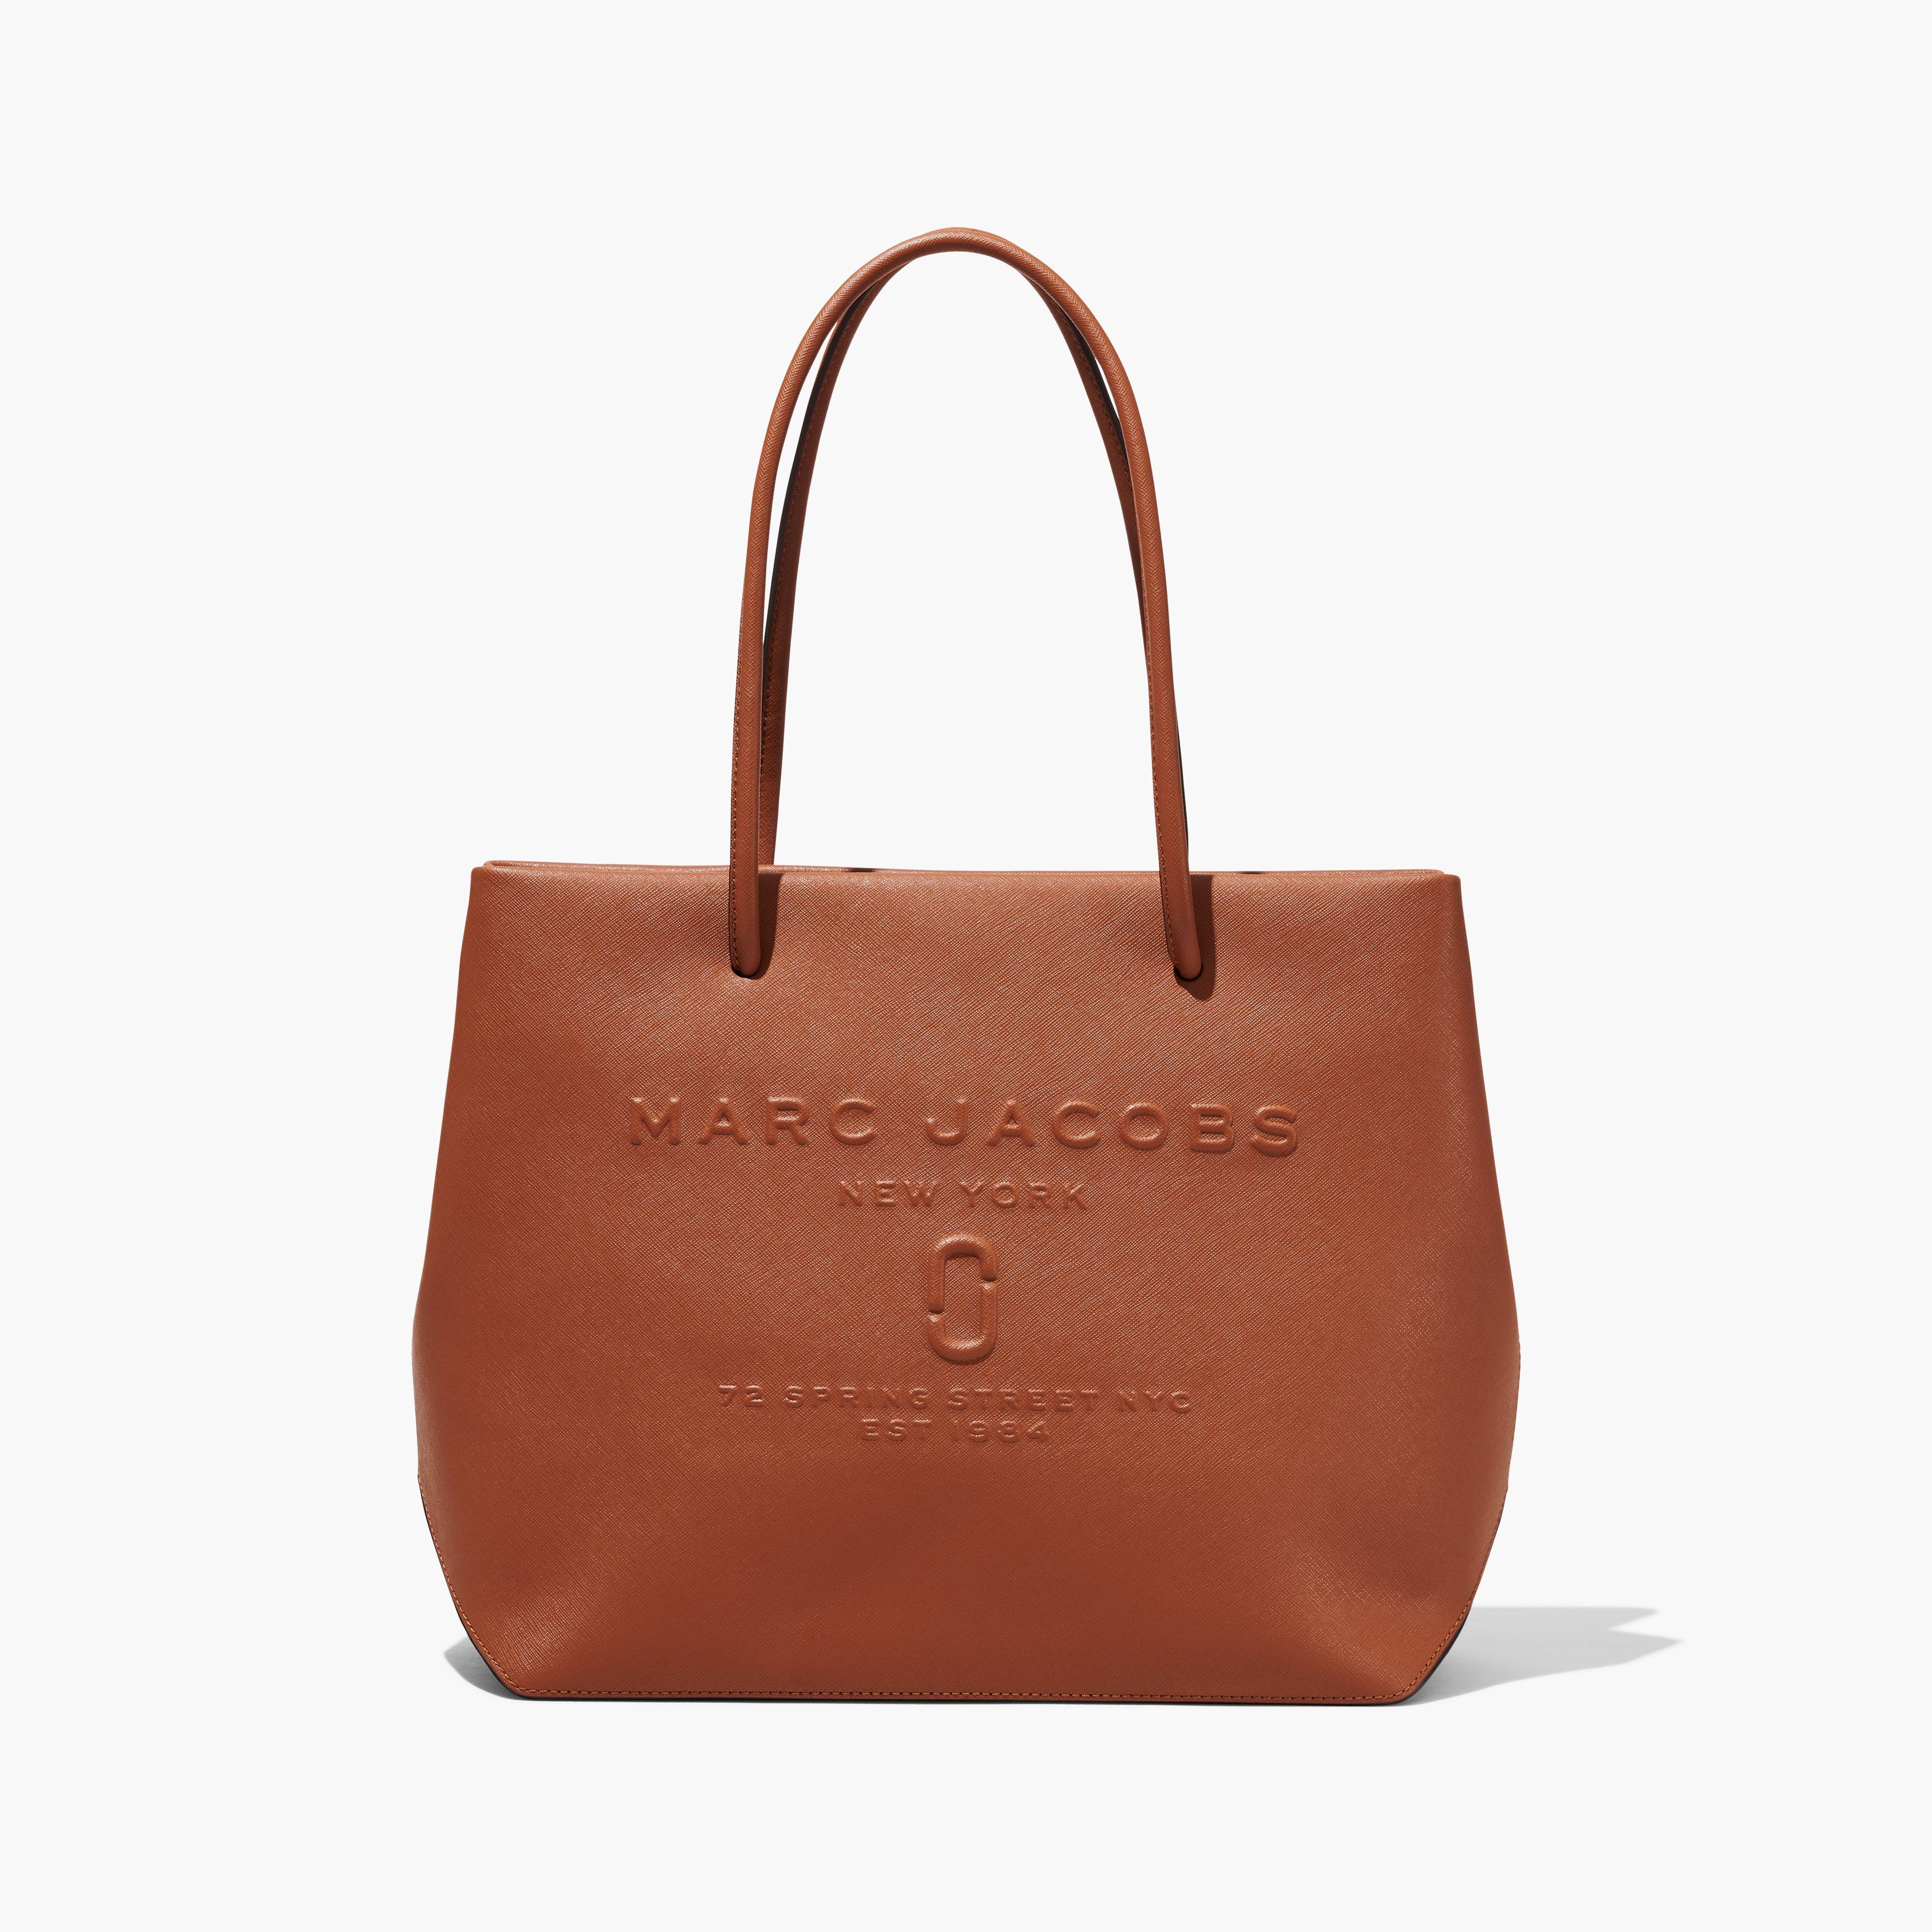 Marc Jacobs Logo Shopper East West Tote Bag in Brown | Lyst